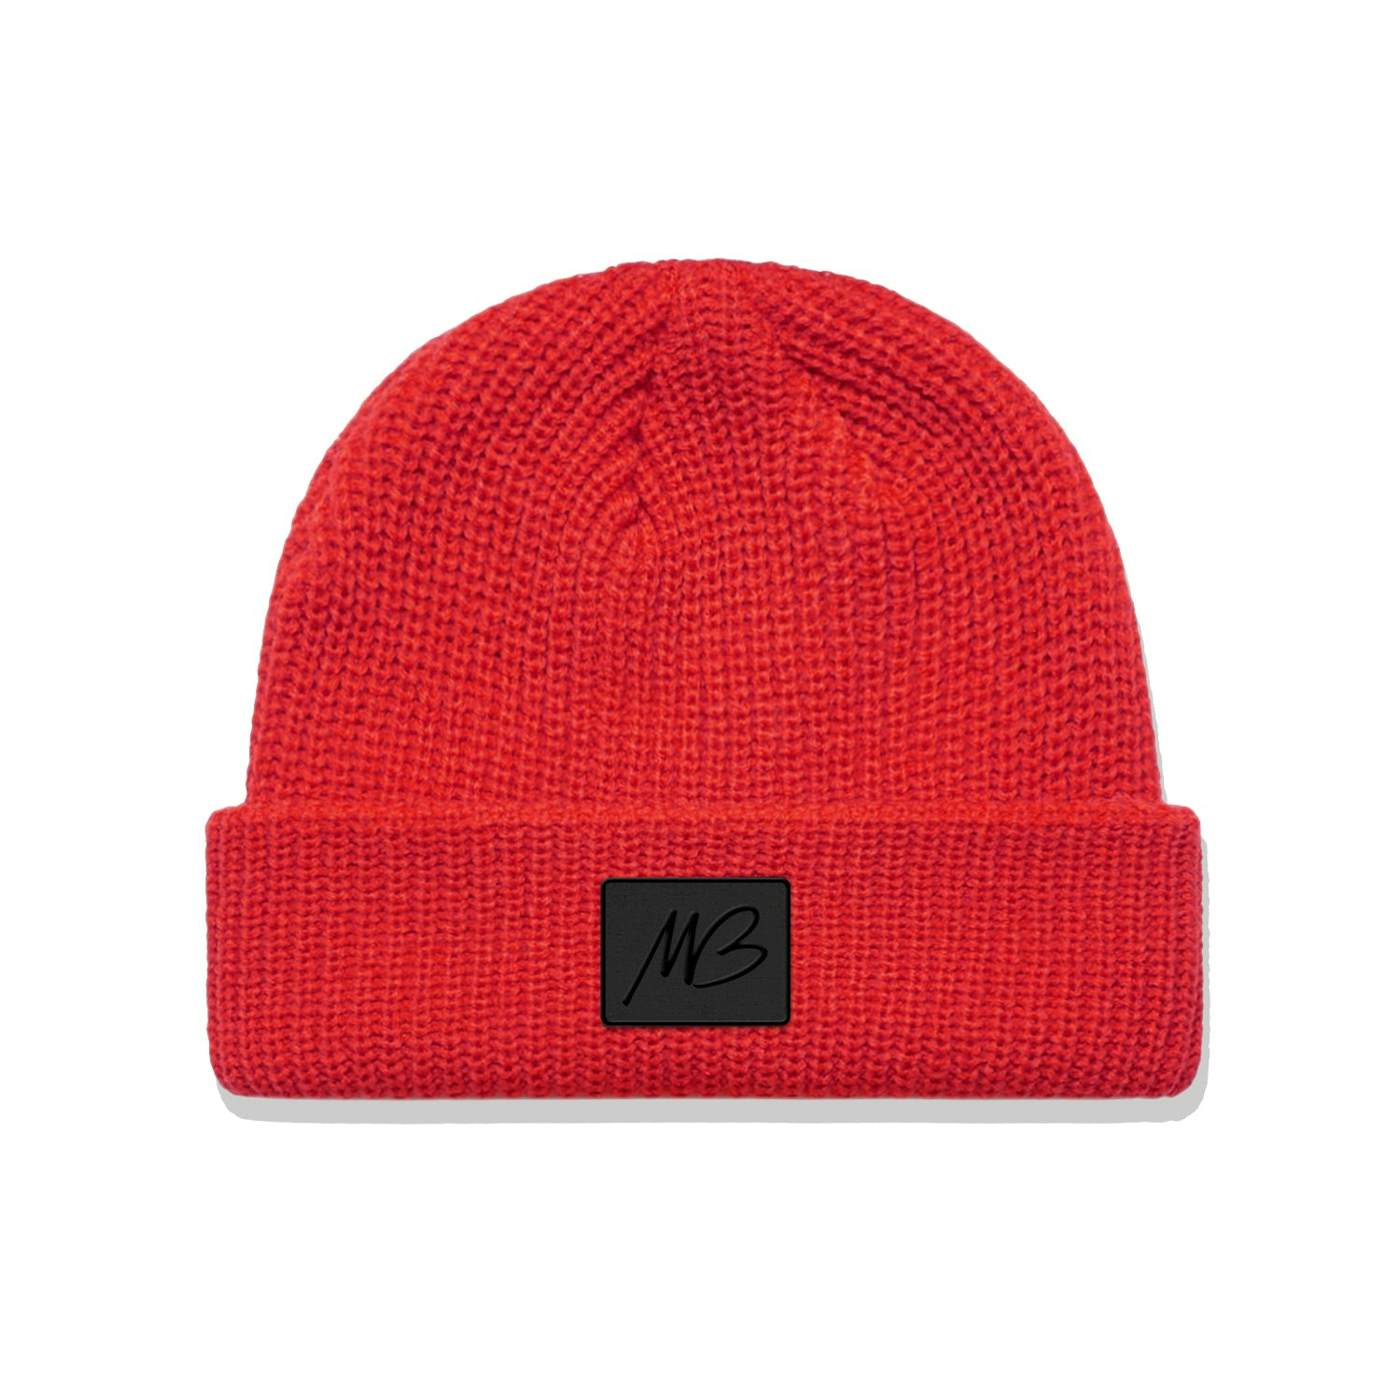 Michael Bublé Initials Patch Red Beanie